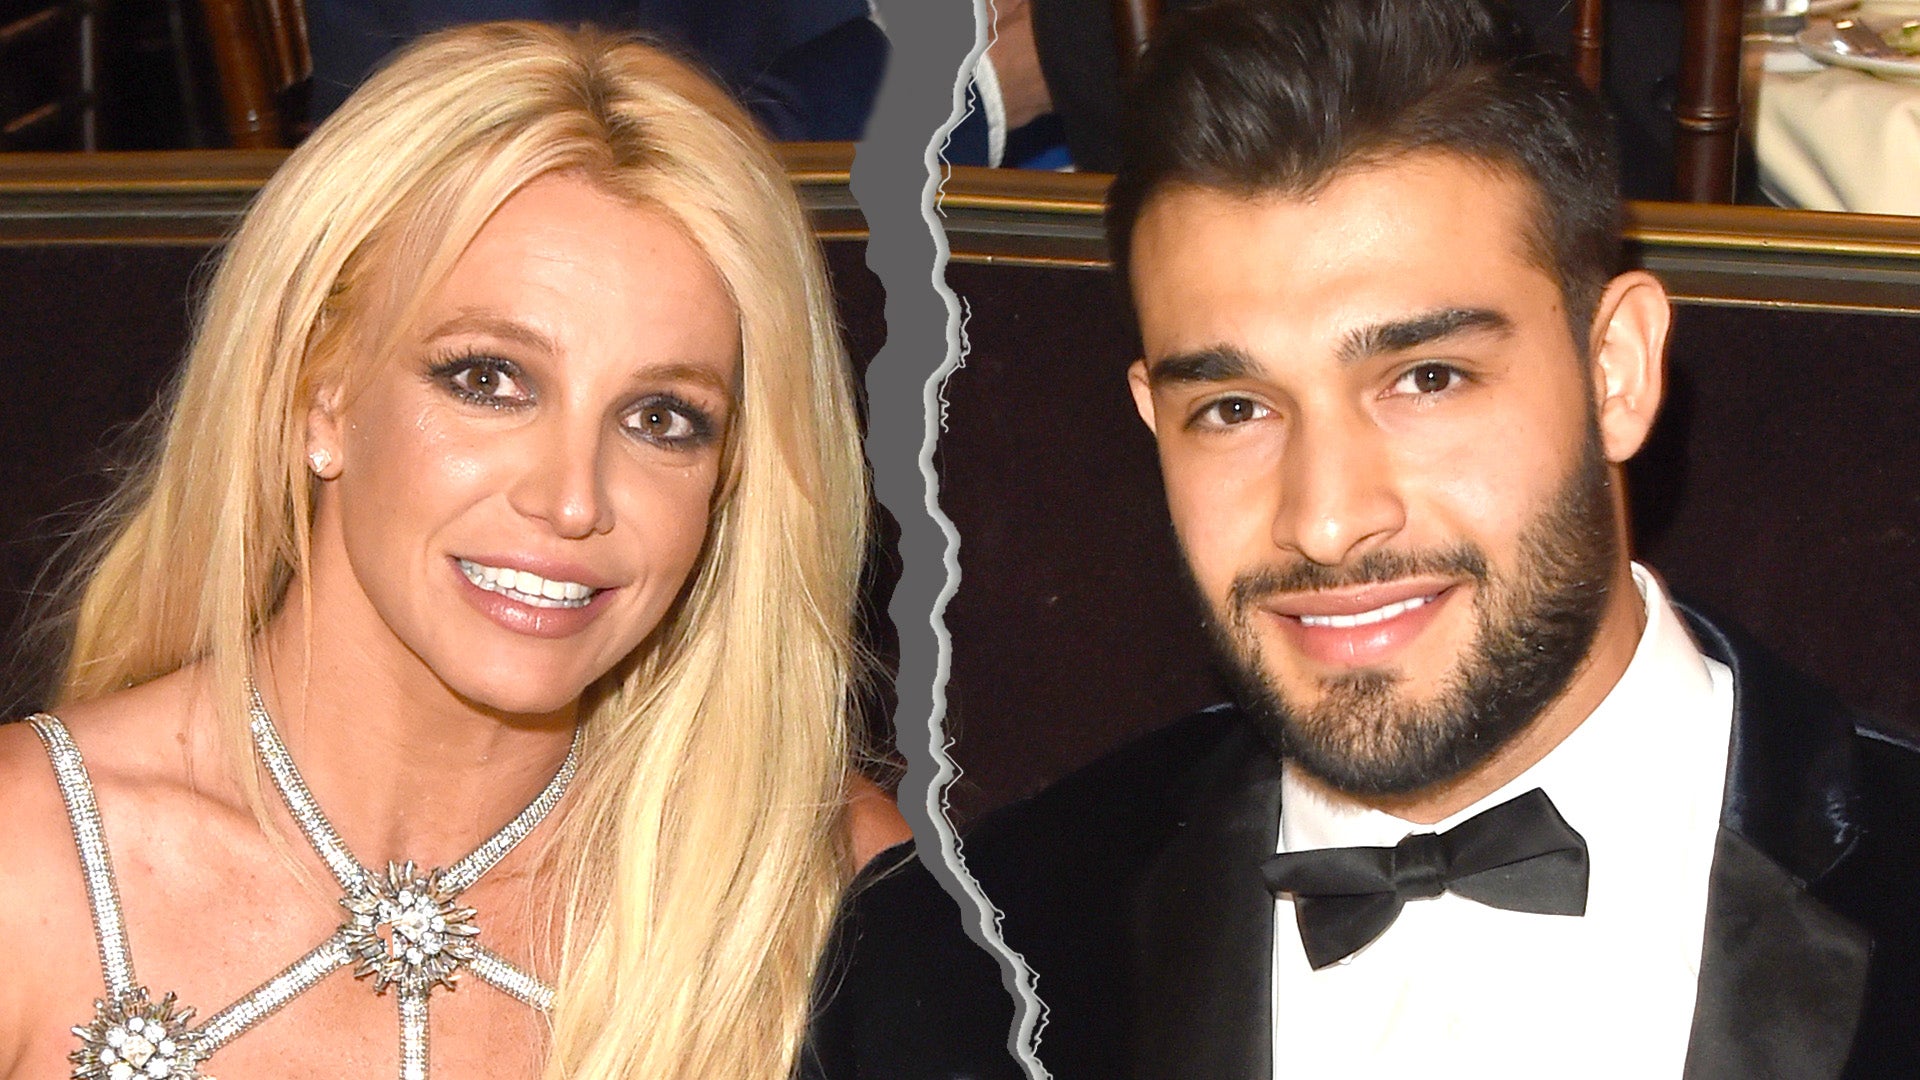 Donatella Versace reflects on her friendship with Britney Spears